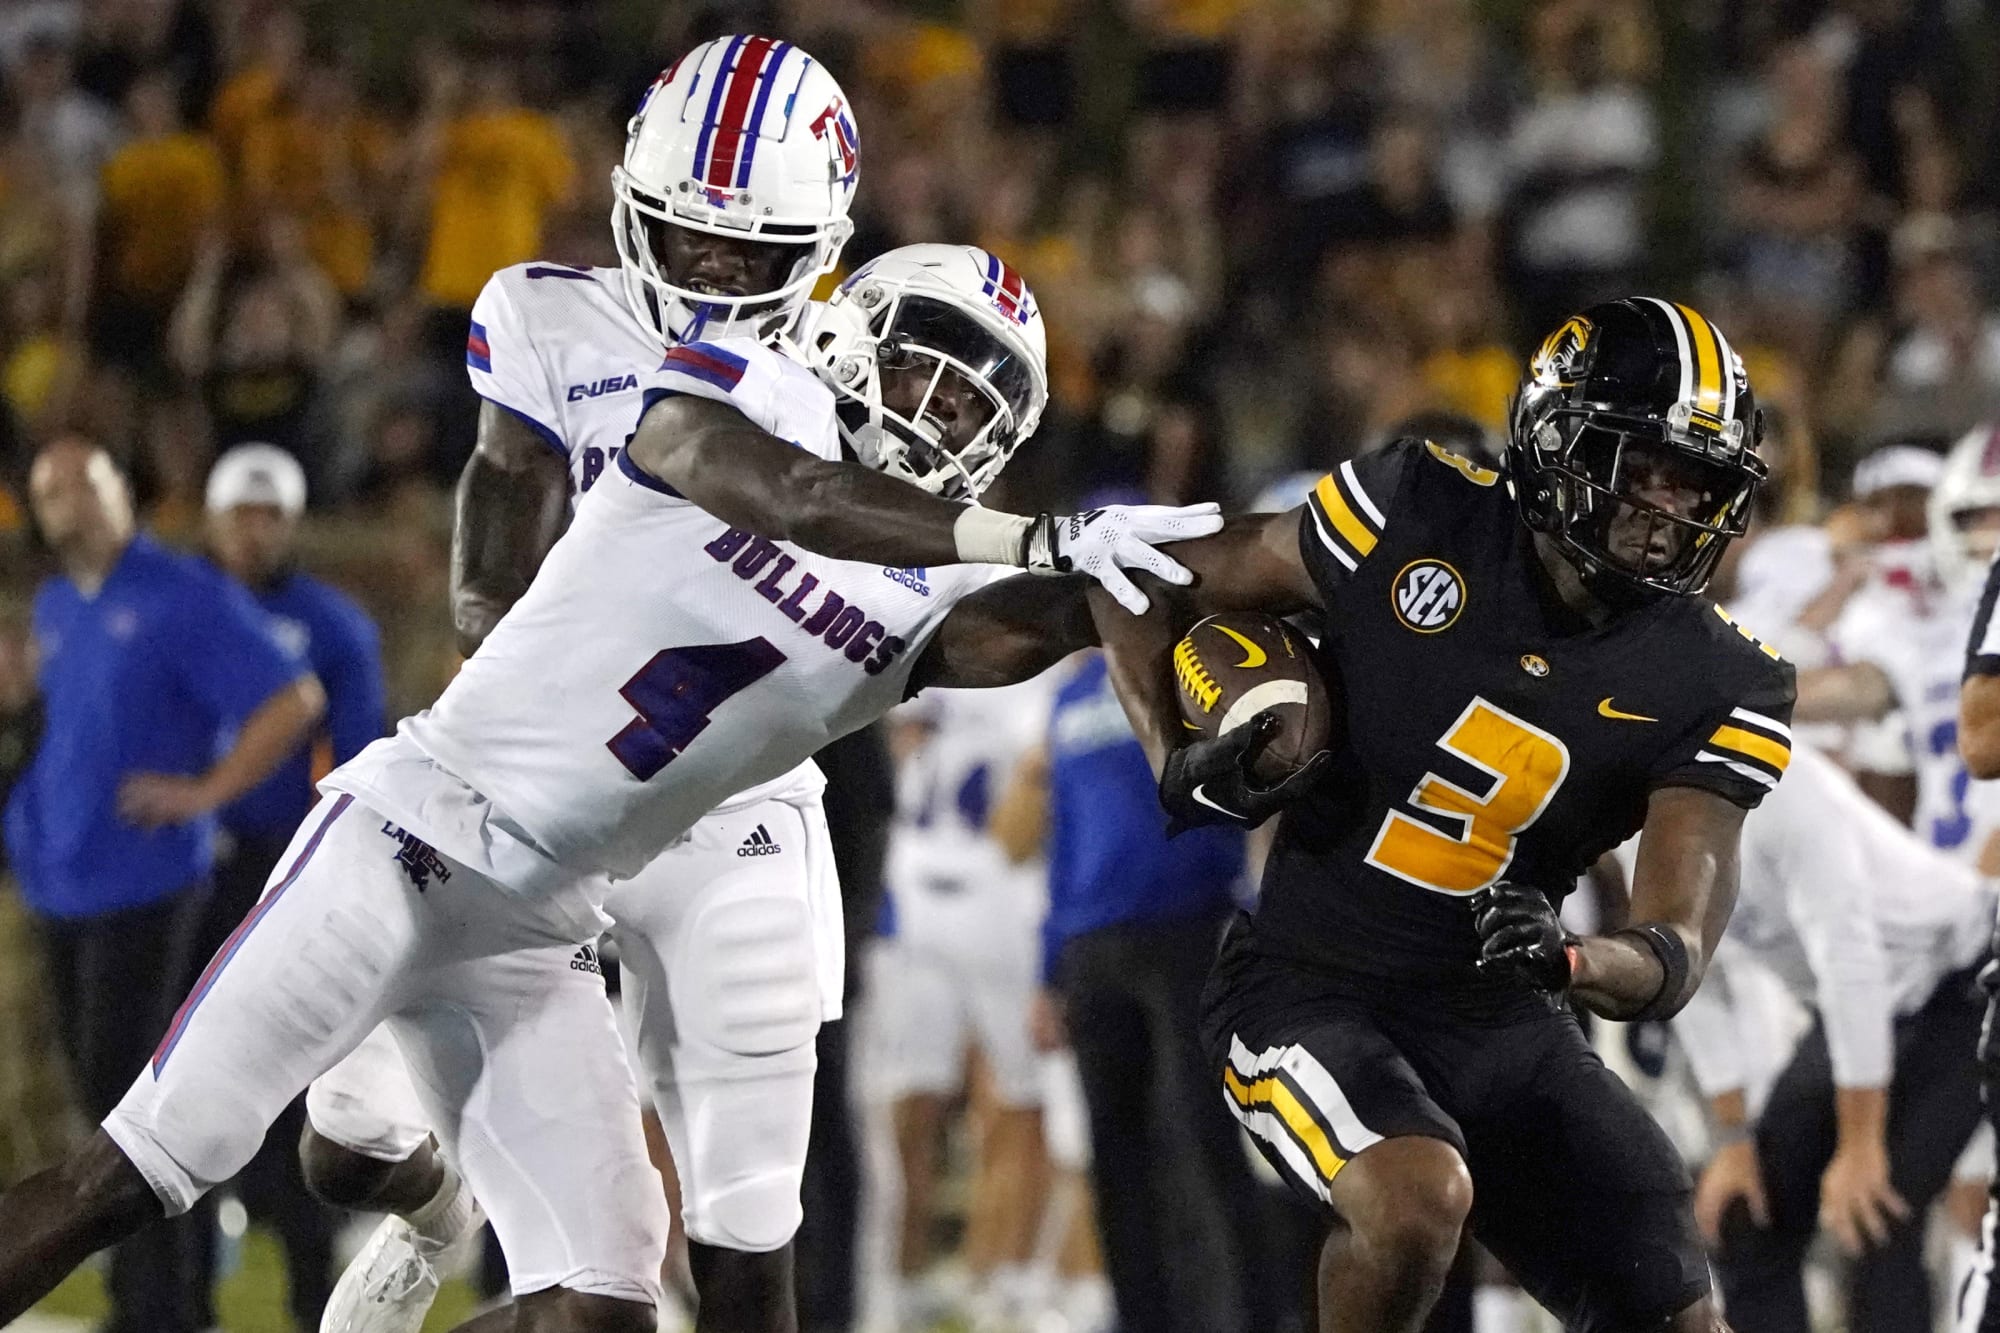 Missouri football 5 things to watch for vs. Kansas State in Week 2